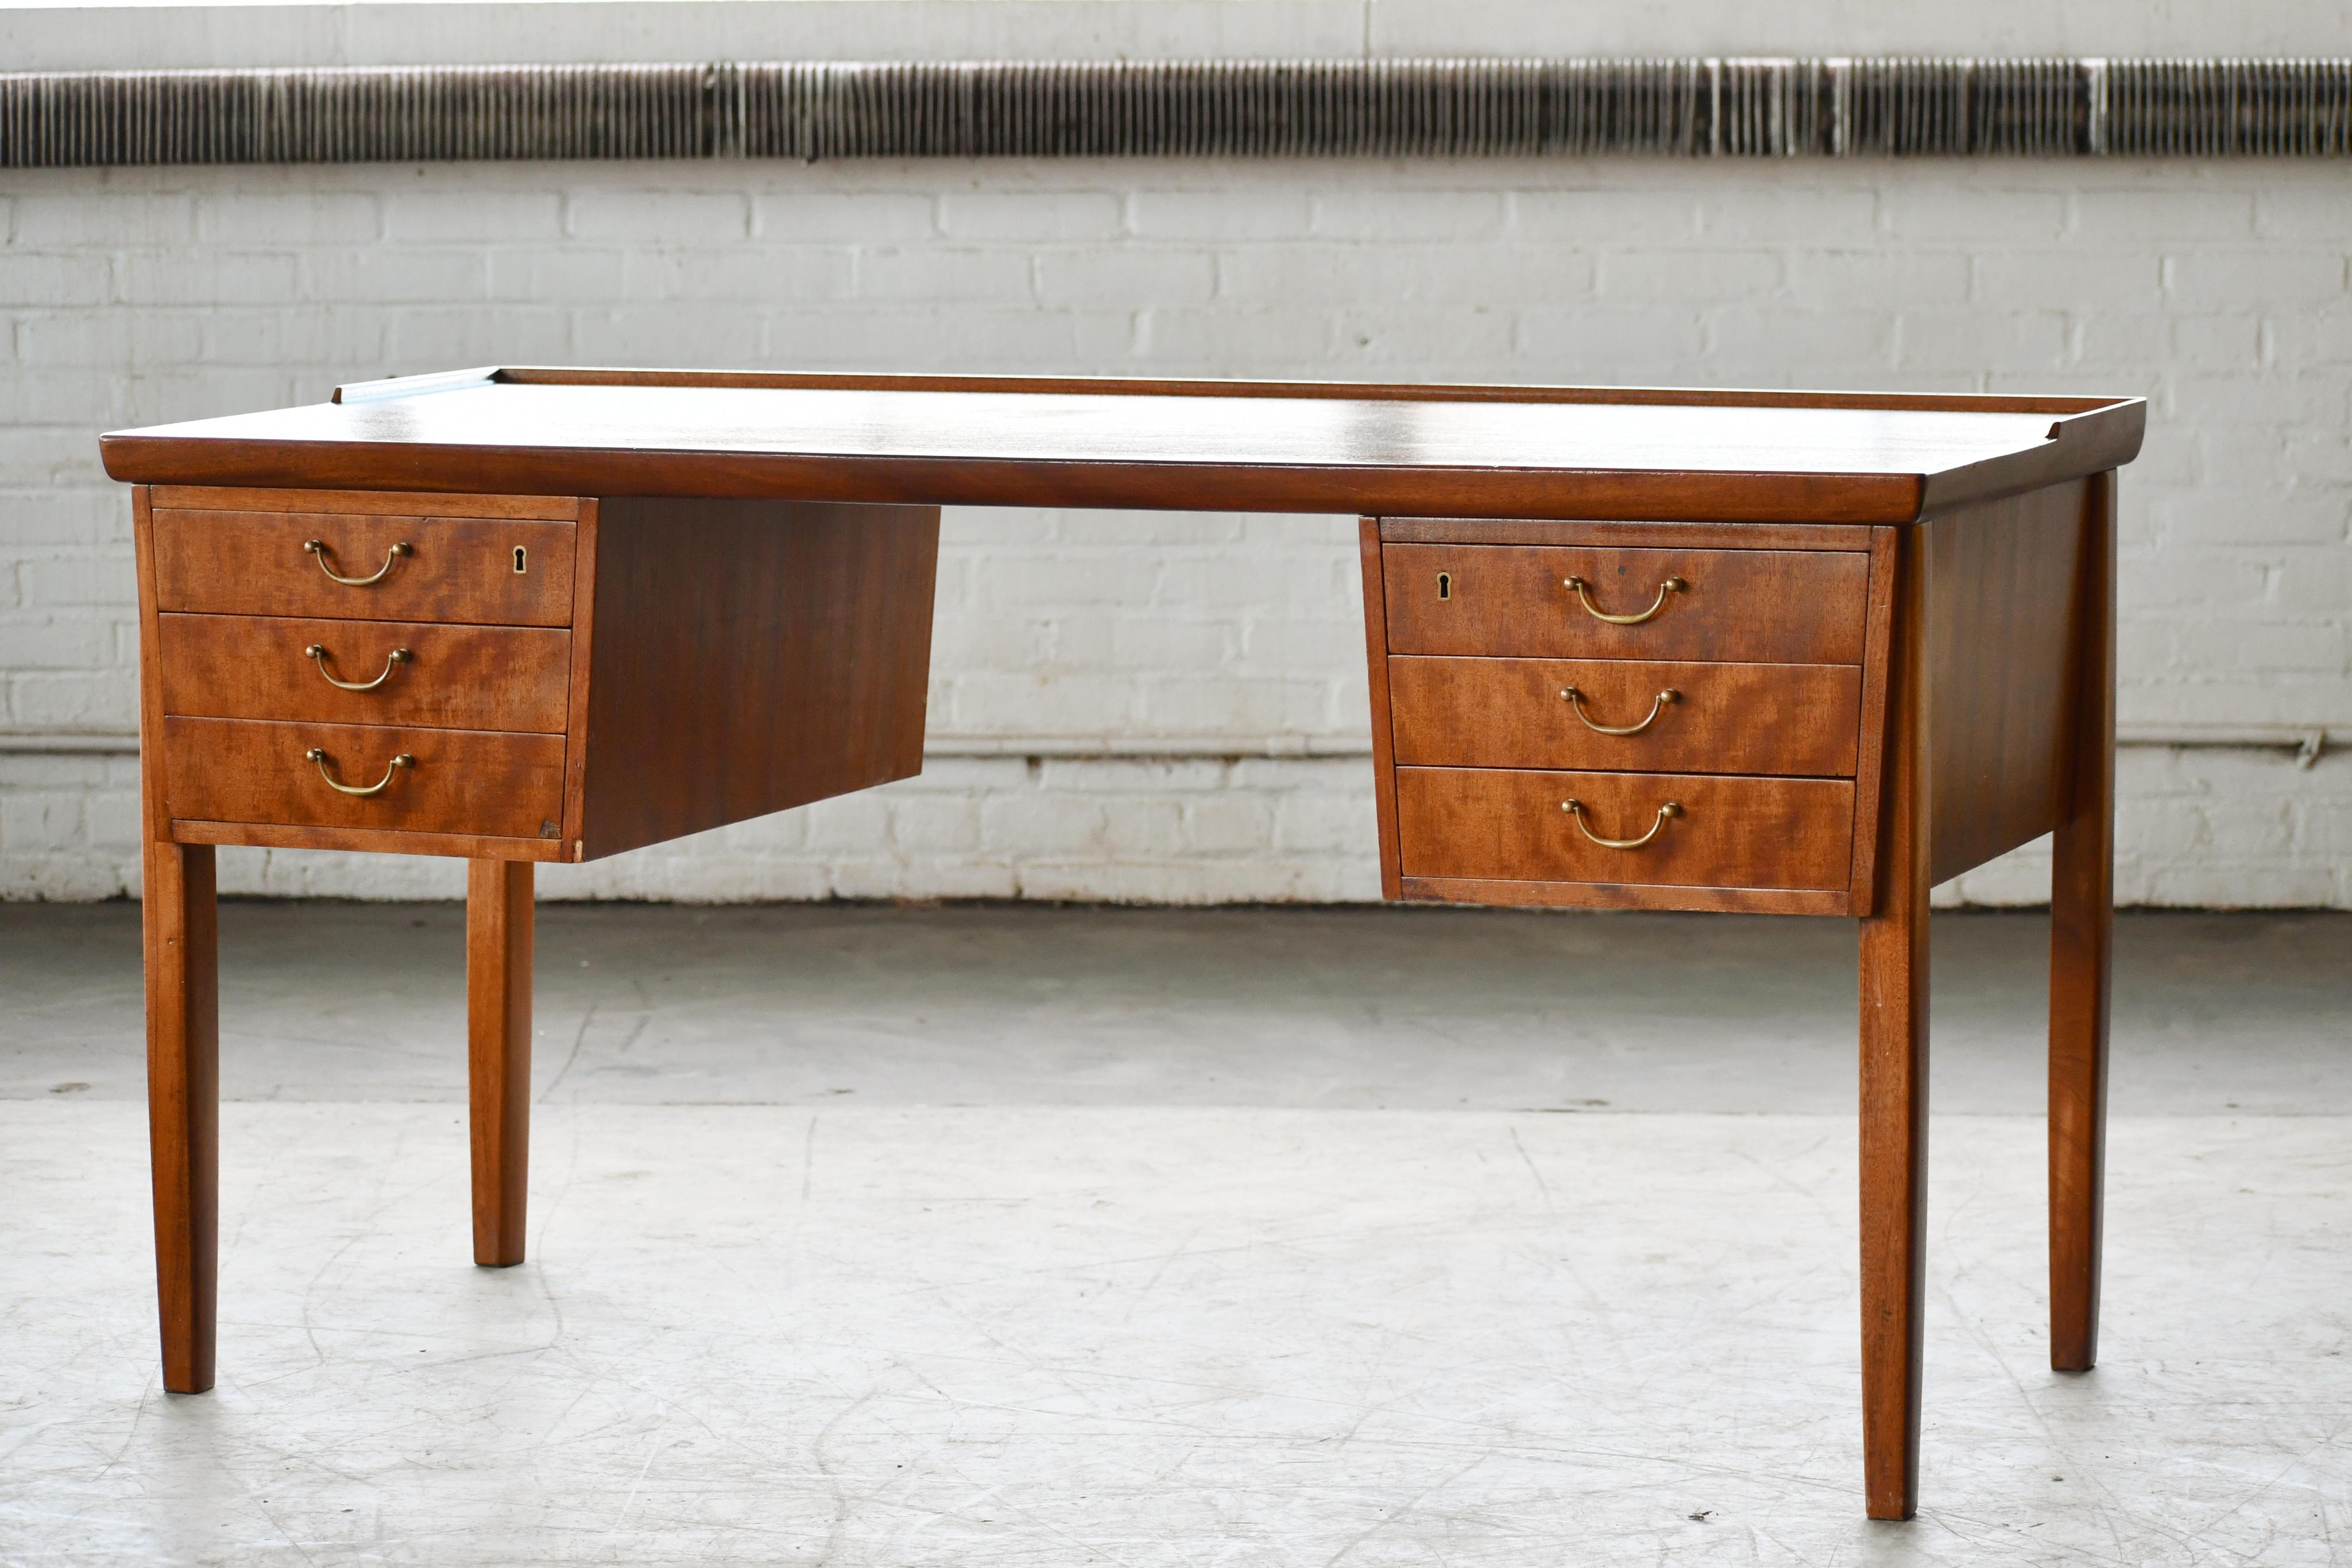 Danish Mid-Century Ole Wanscher style writing desk in mahogany ca. 1950. Elegant very functional table. The brass pulls are typical for the era we love the shape of the tapered legs which are less typical and provide for a nice modern look. Nice